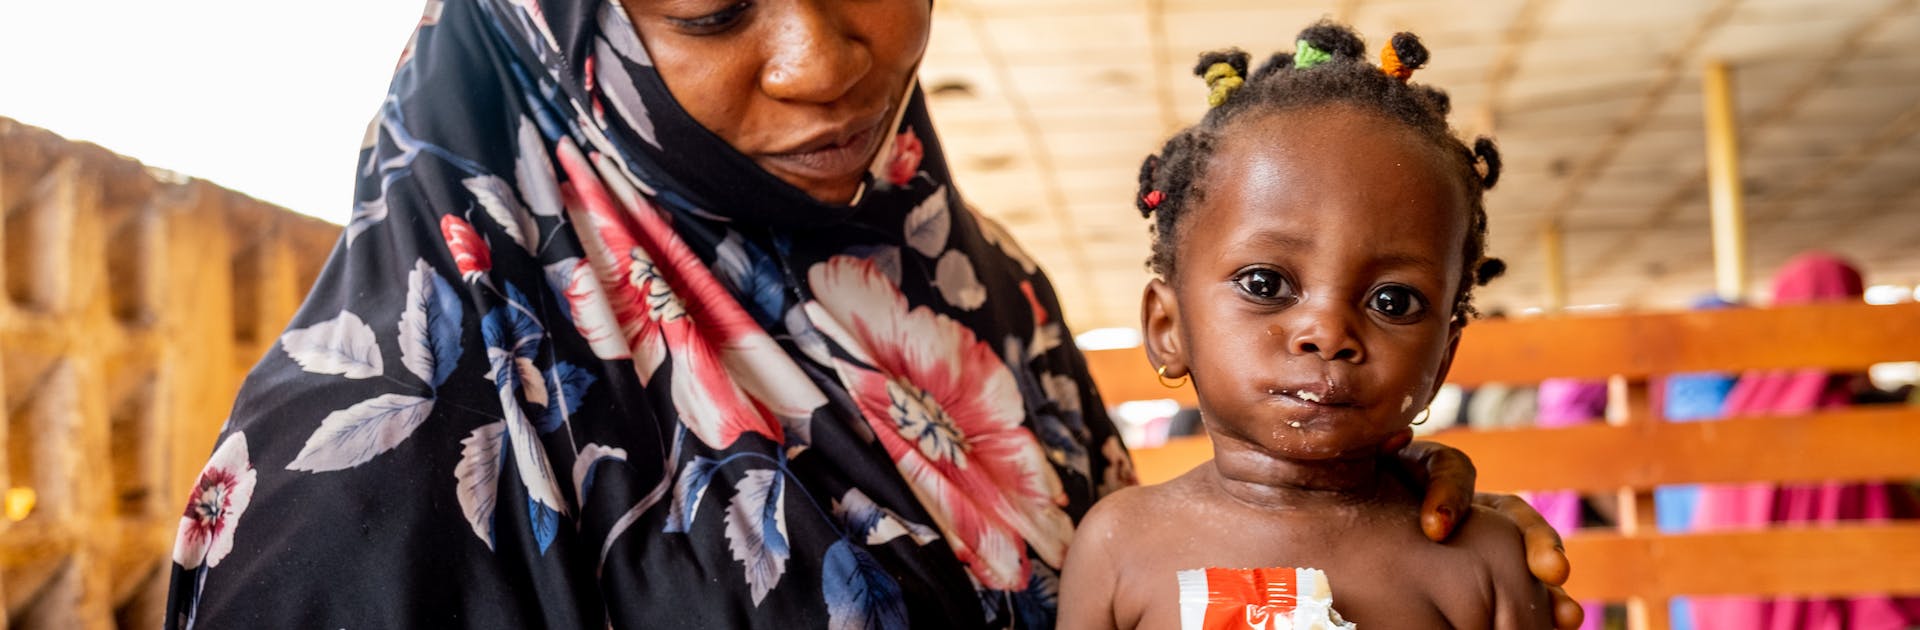 Malnutrition can be deadly for a child like Hafsat. She's eating ready-to-use therapeutic food (RUTF) which is helping save her life.